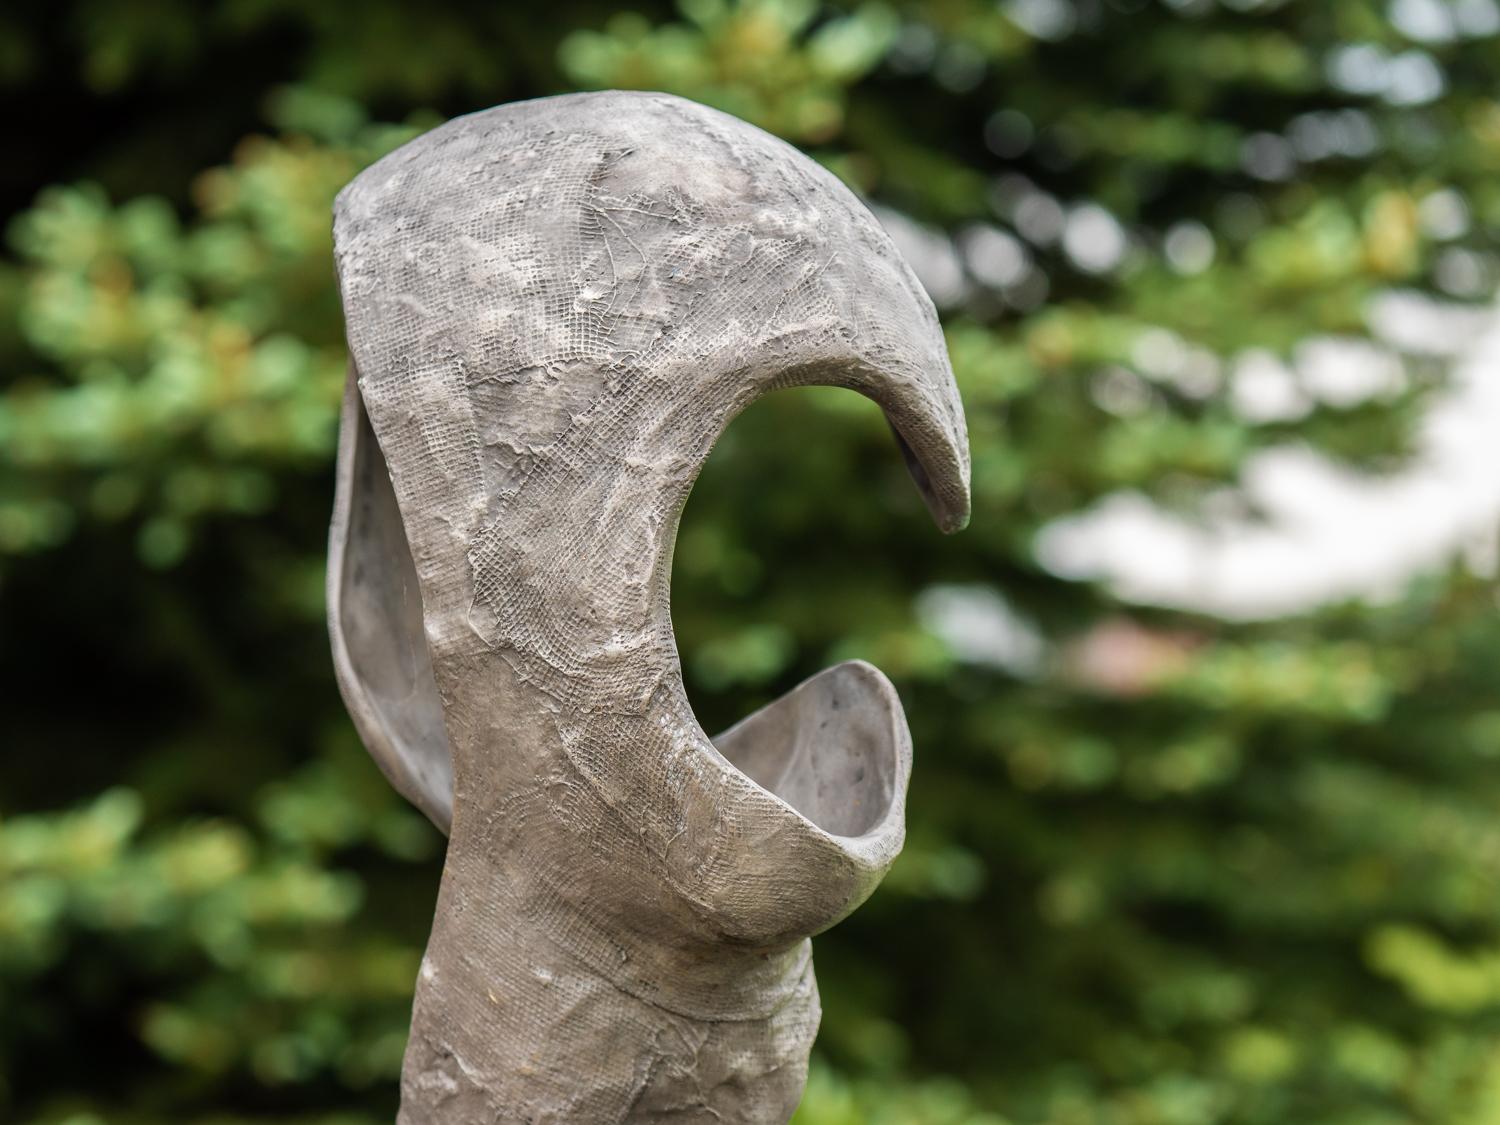 V_N_S Edition 4/9 - tall, abstracted, figurative female bronze outdoor sculpture - Contemporary Sculpture by David Fisher